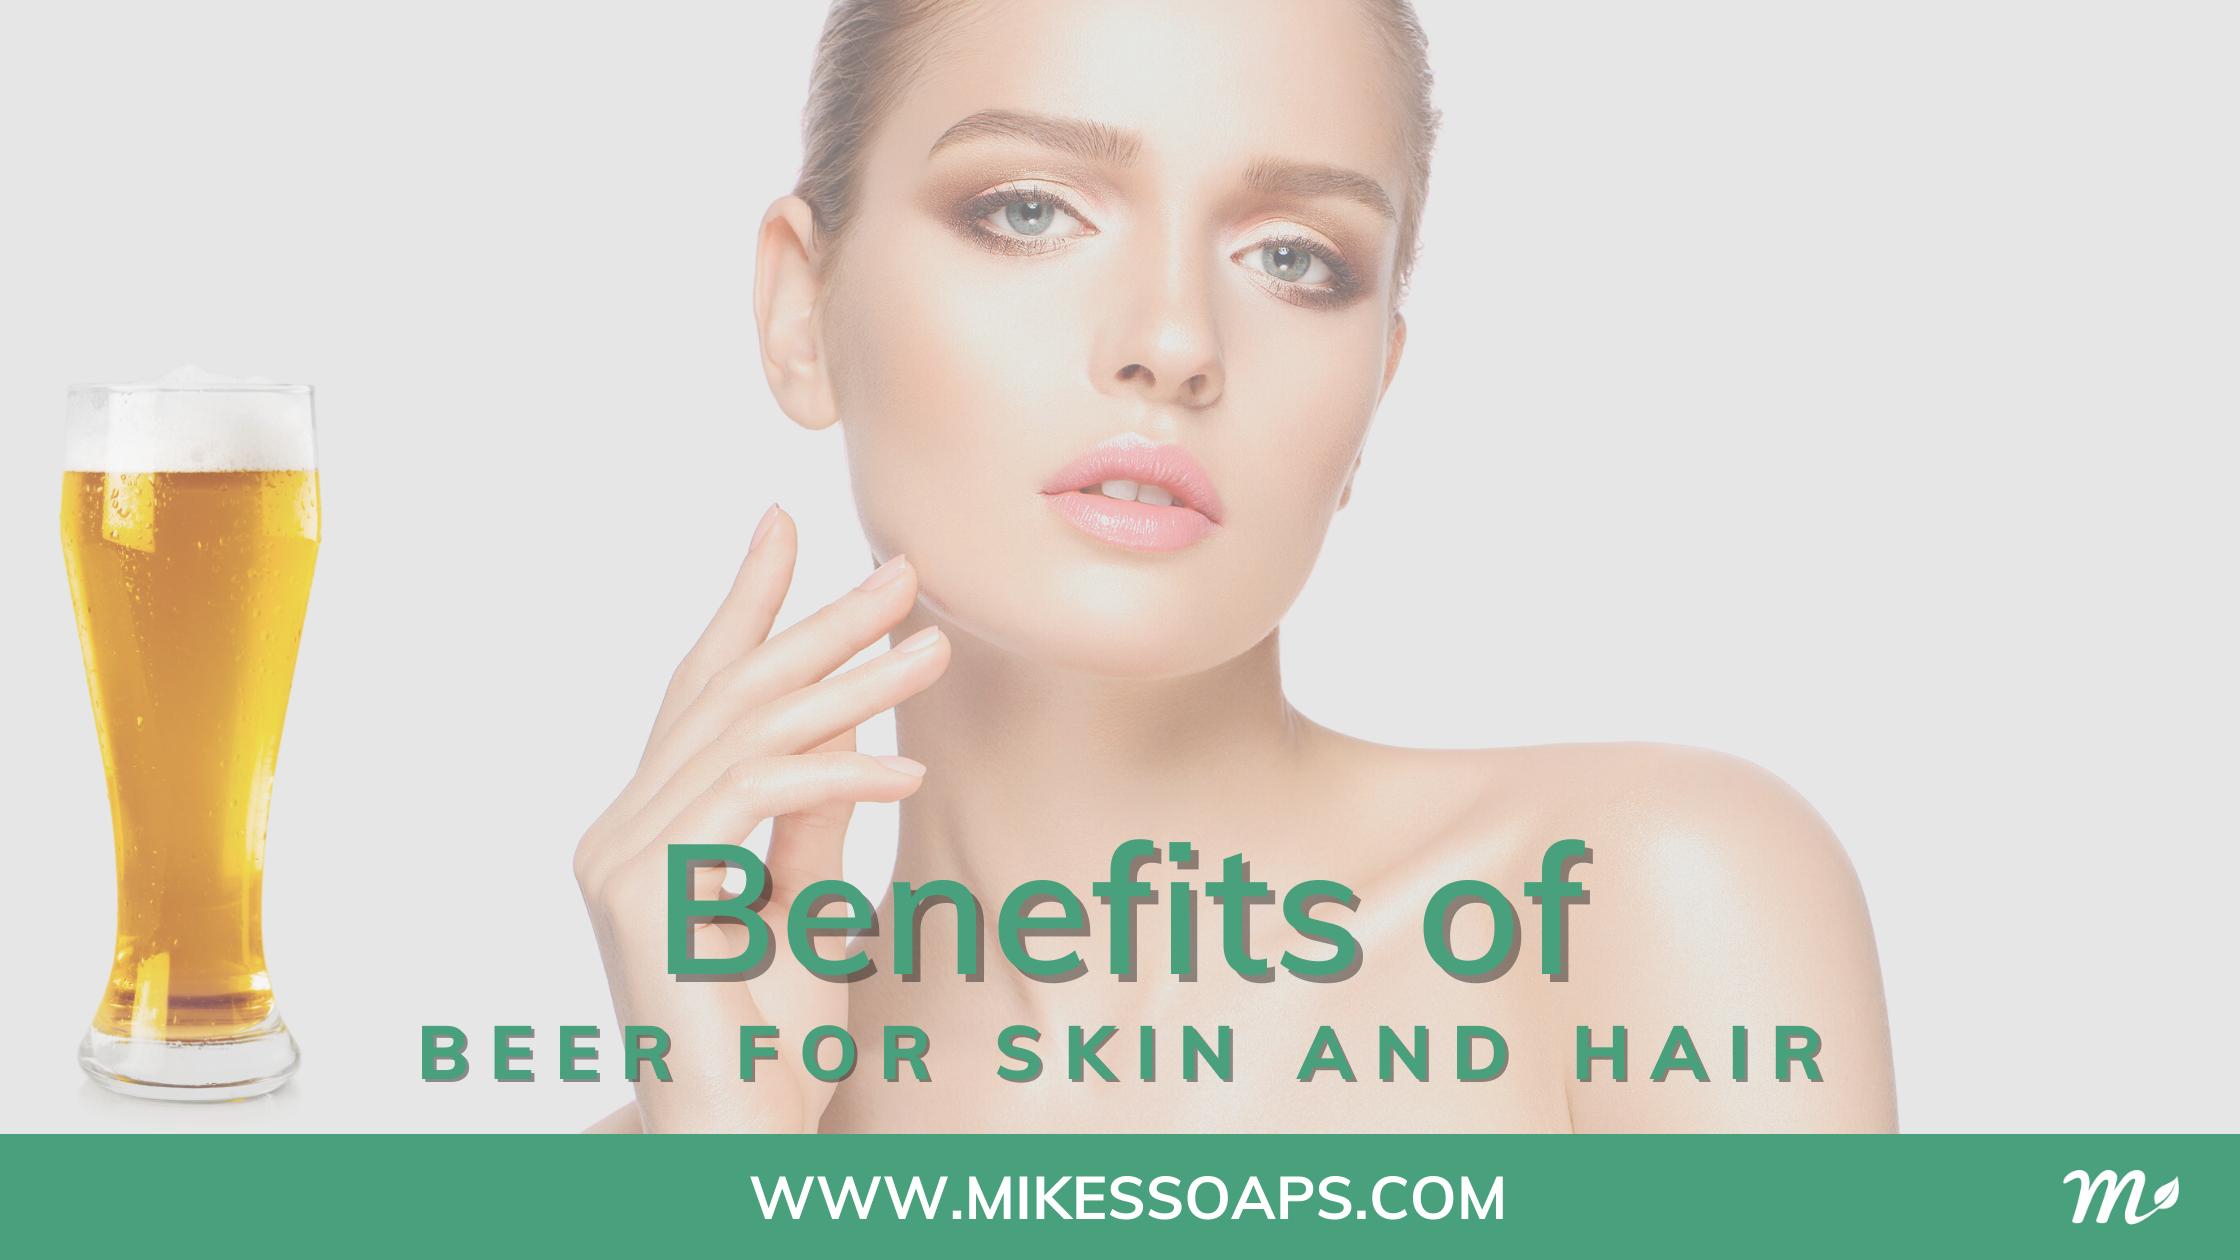 Beer Benefits For Hair | Mike's Soaps